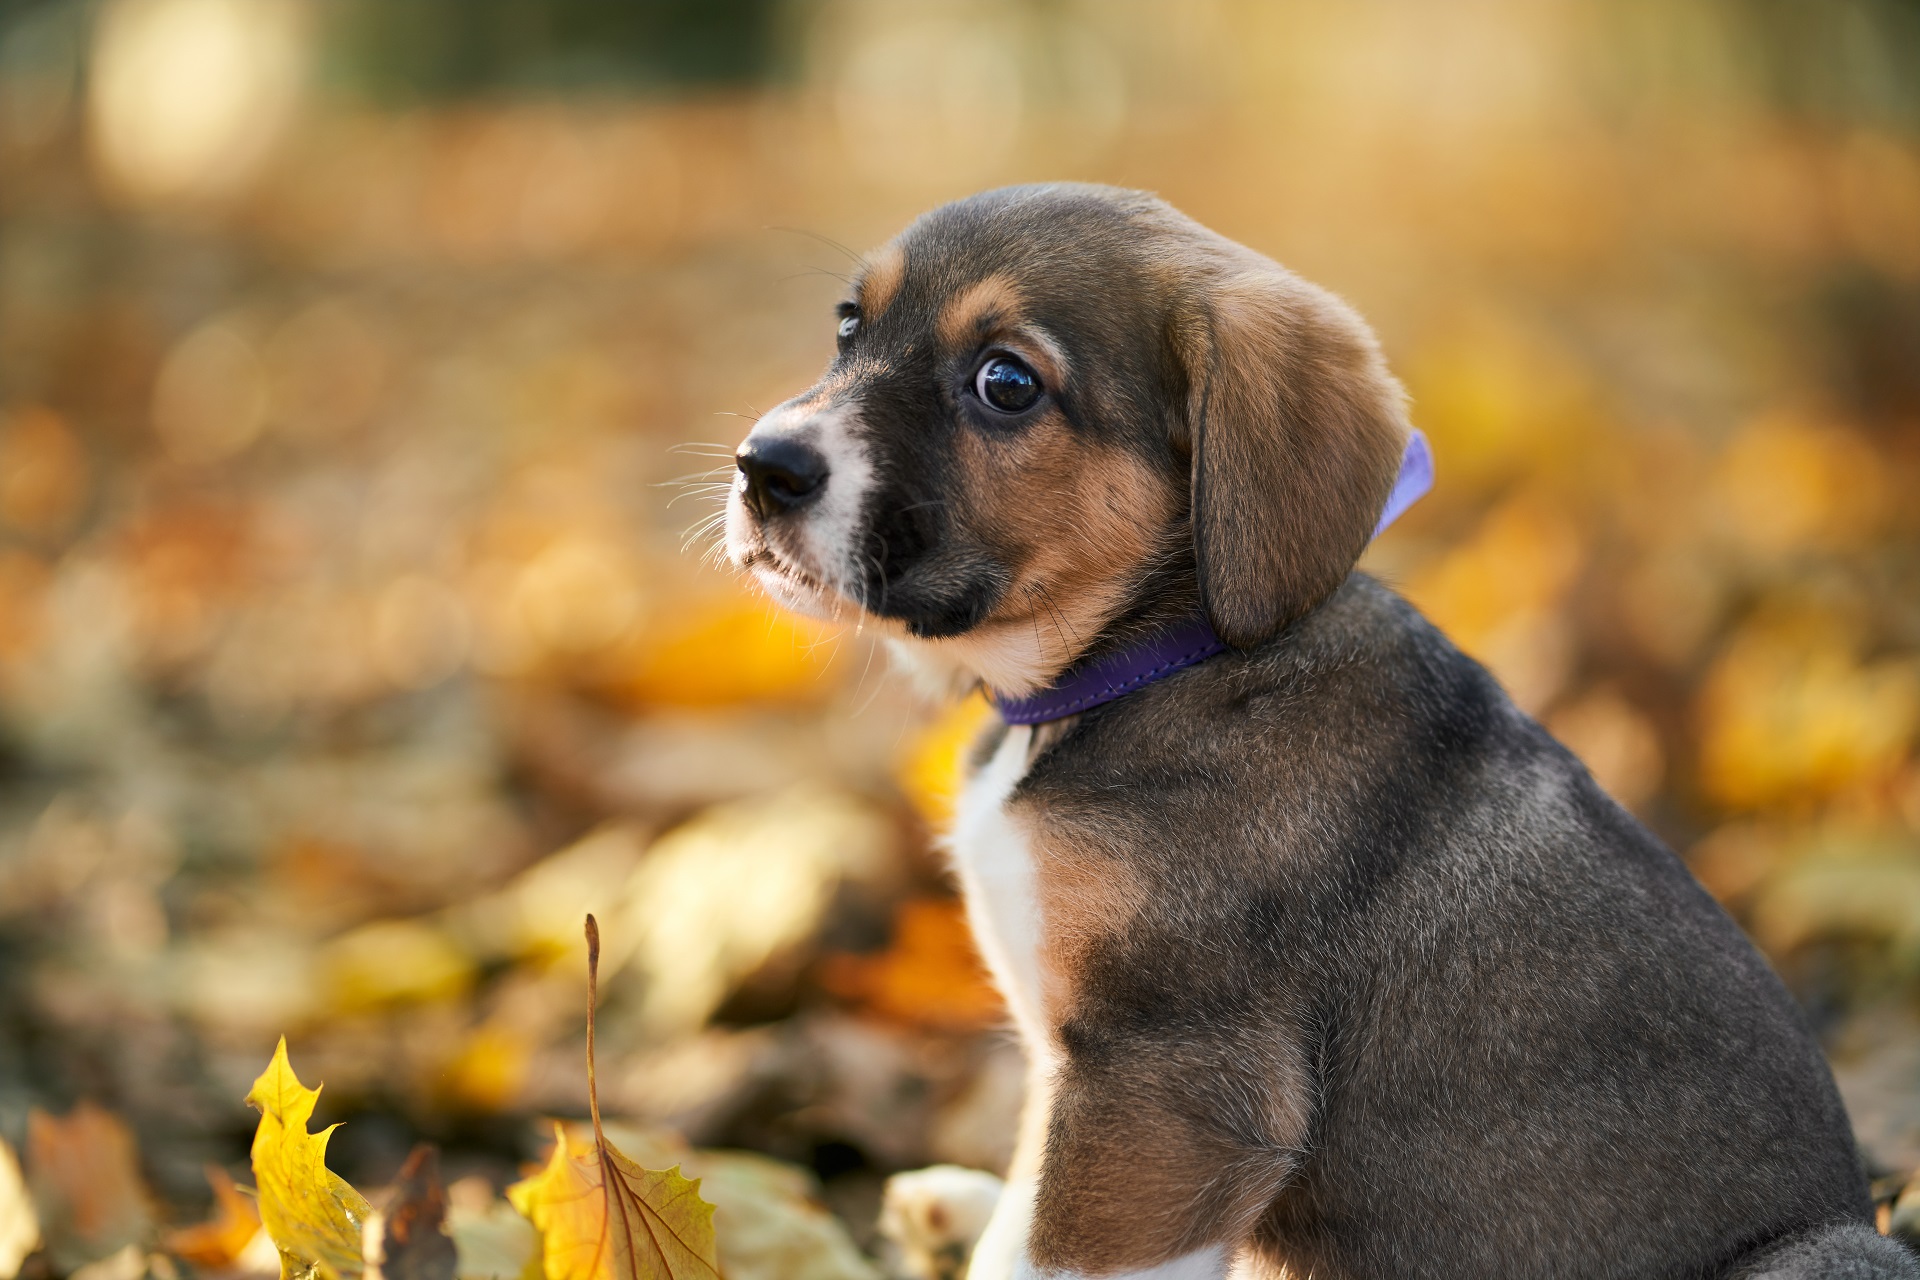 Puppy with violet collar sitting on autumn leaves in park.